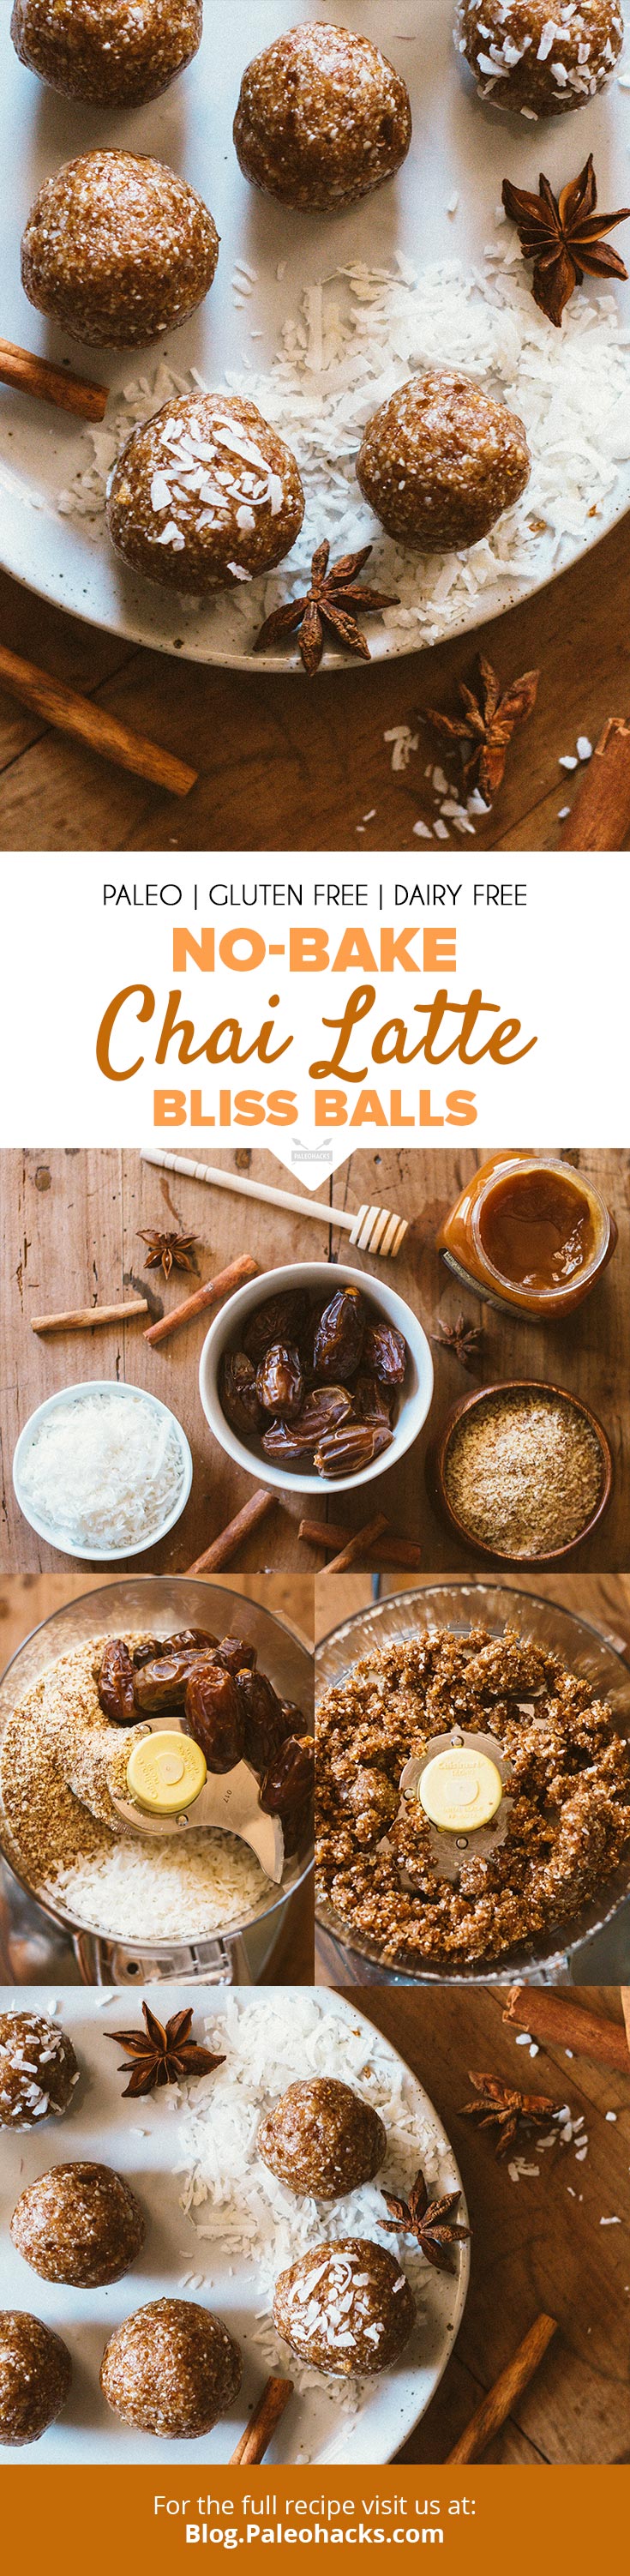 Curb your sugar cravings with these easy no-bake bliss balls infused with dreamy fall spices. Any excuse to ditch the long coffeehouse lines is cool with us